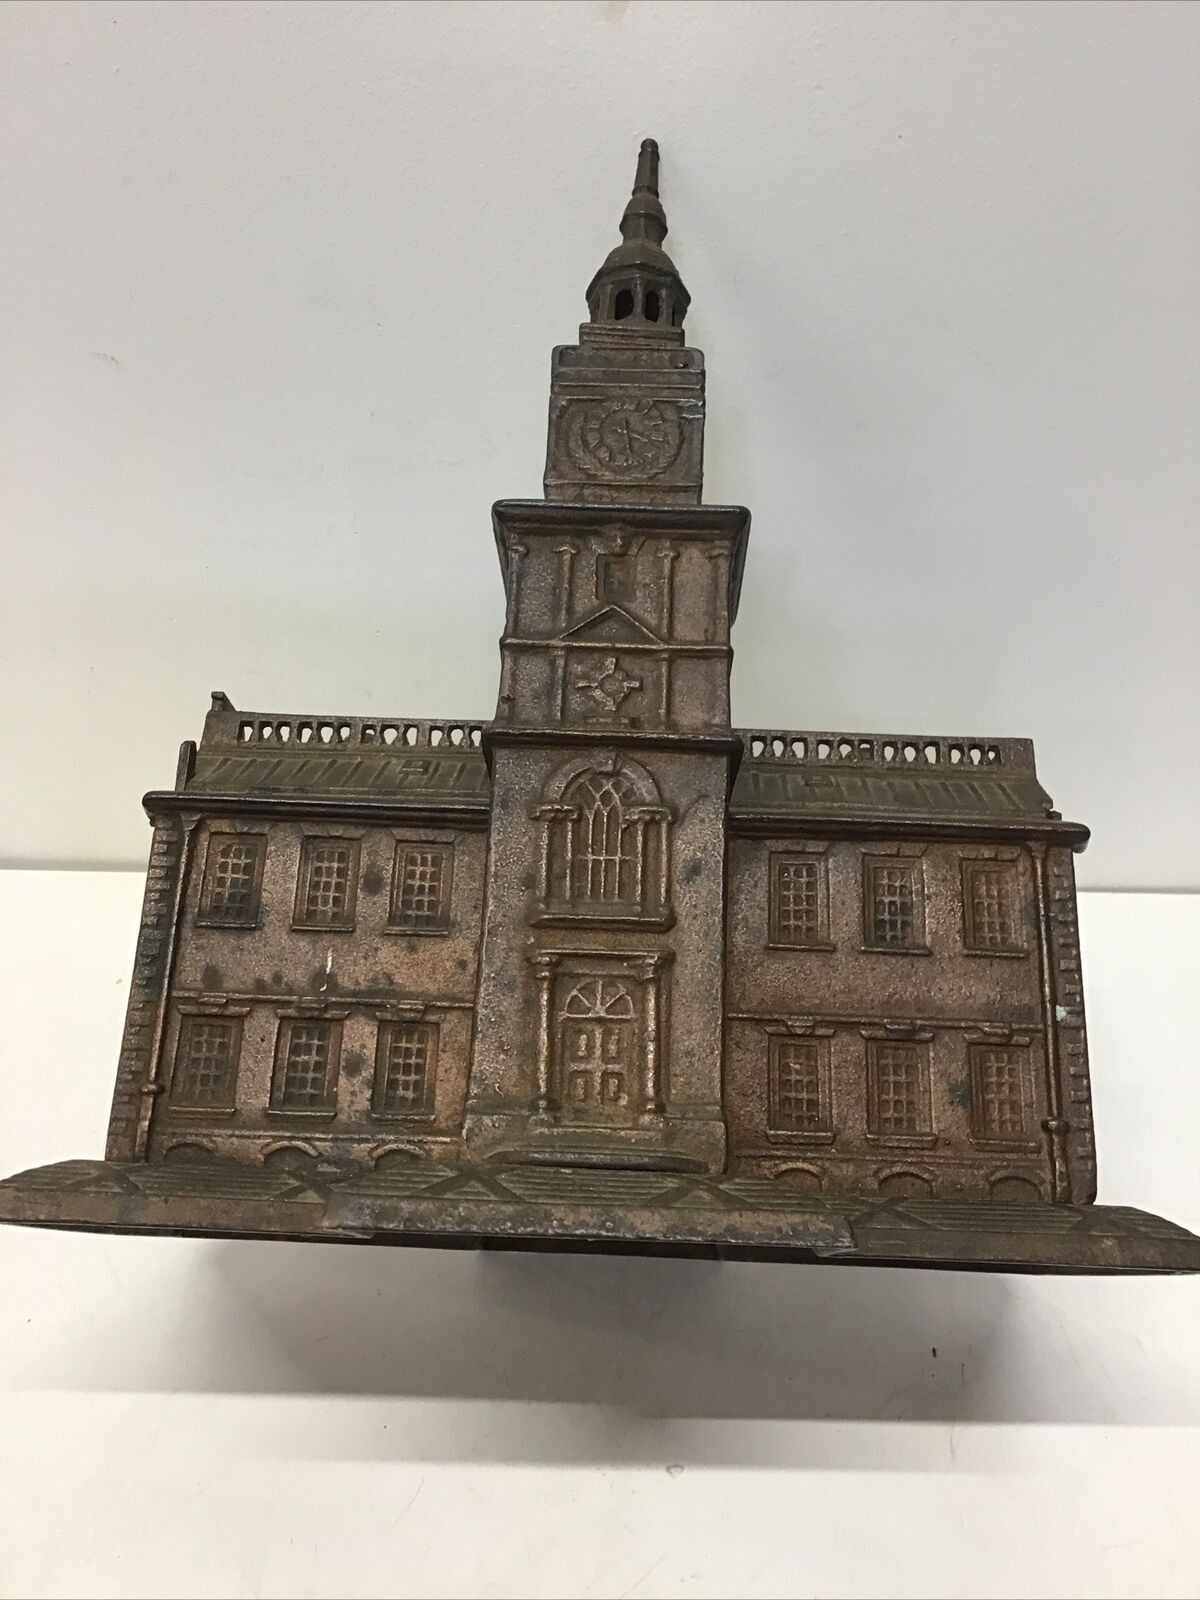 Antique Large Independence Hall Cast Iron Coin Bank 1875 Enterprise, Mfg. Co.